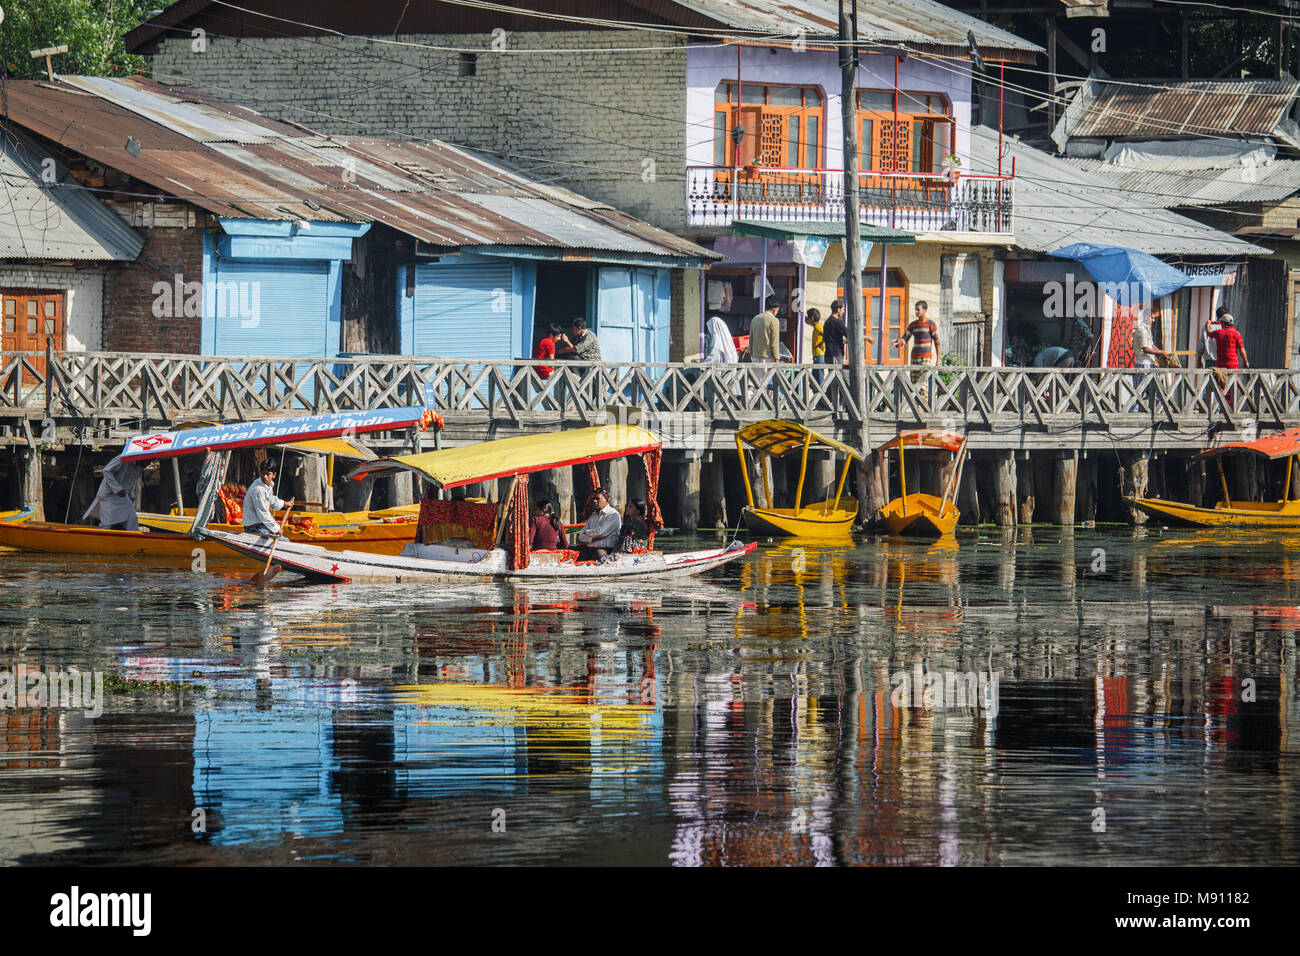 Shikara pleasure boats on Dal Lake in Srinagar City, Kashmir. A bustling reportage scene with lakeside houses, wooden promenade and water reflection Stock Photo